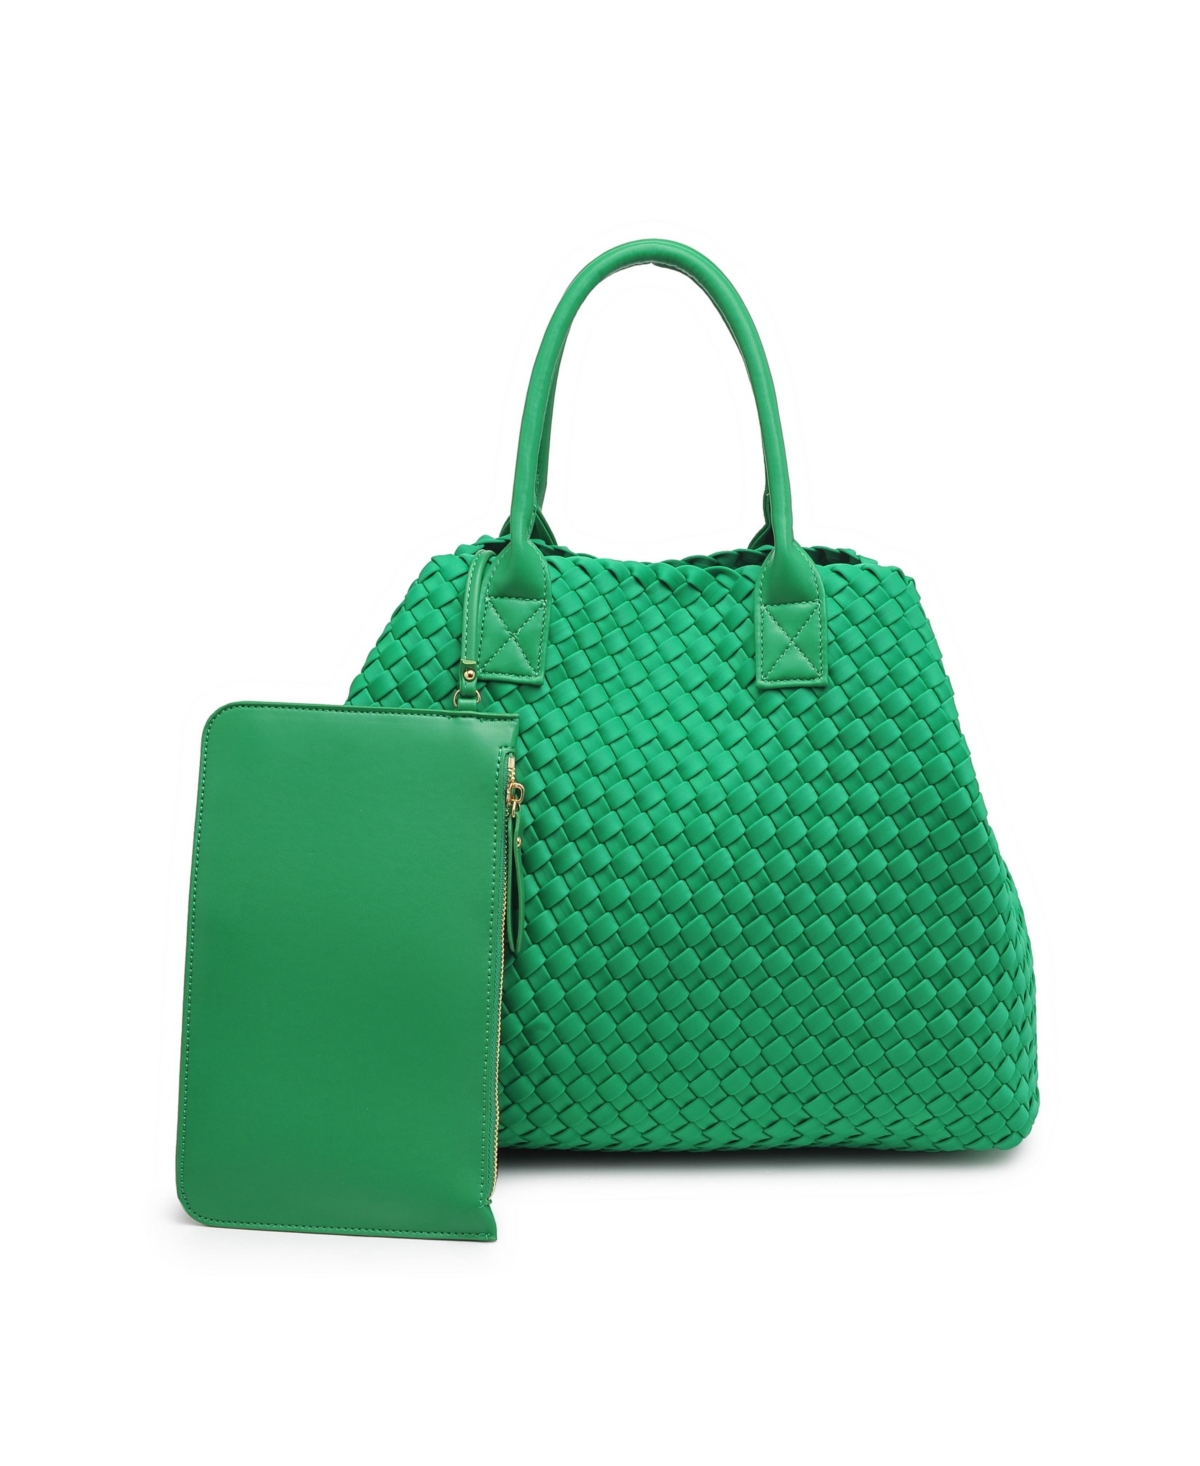 Urban Expressions Ithaca Woven Neoprene Tote In Kelly Green